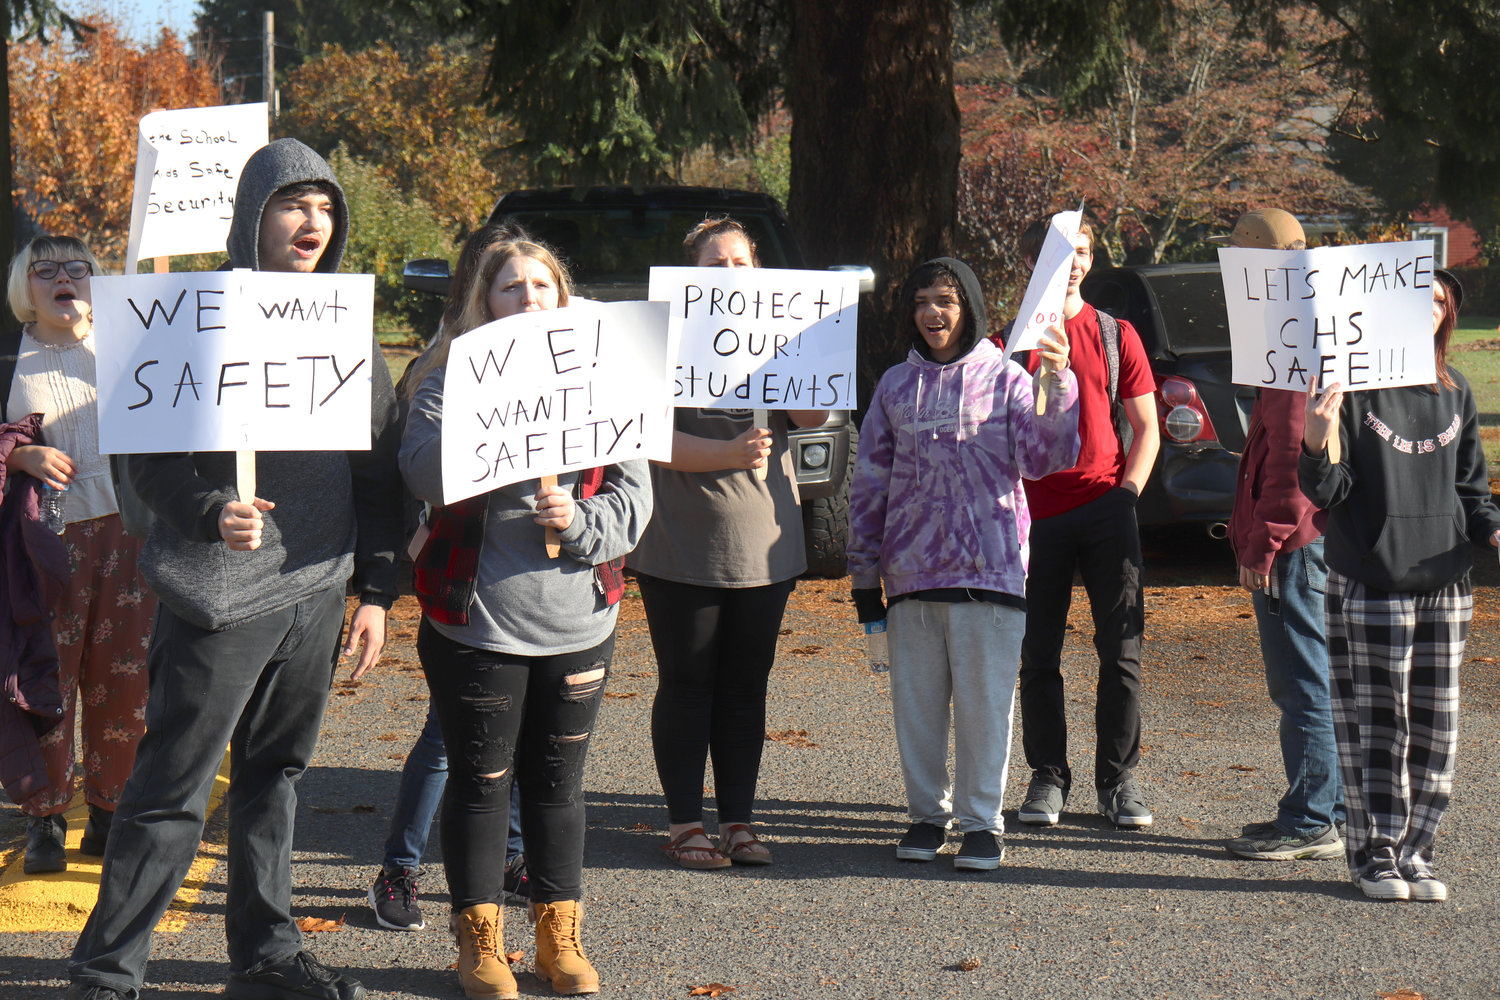 Centralia High School students protest outside the Centralia School Administration Office during a protest over safety and security concerns on Thursday.